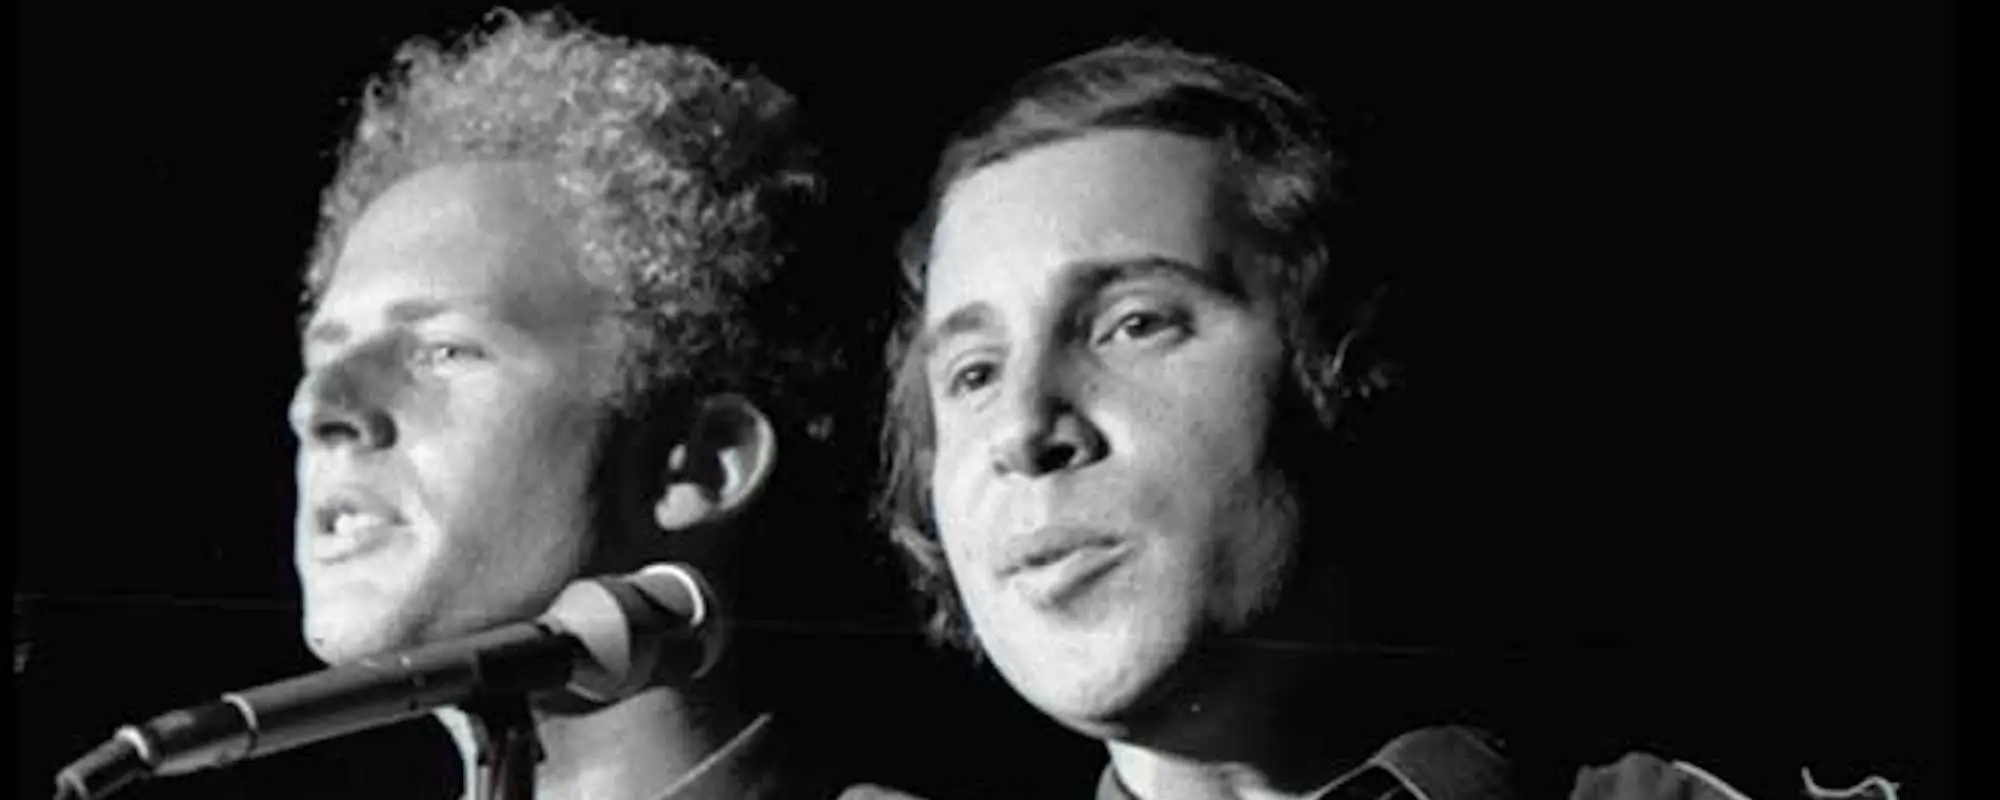 The Meaning Behind “Bridge Over Troubled Water” by Simon & Garfunkel